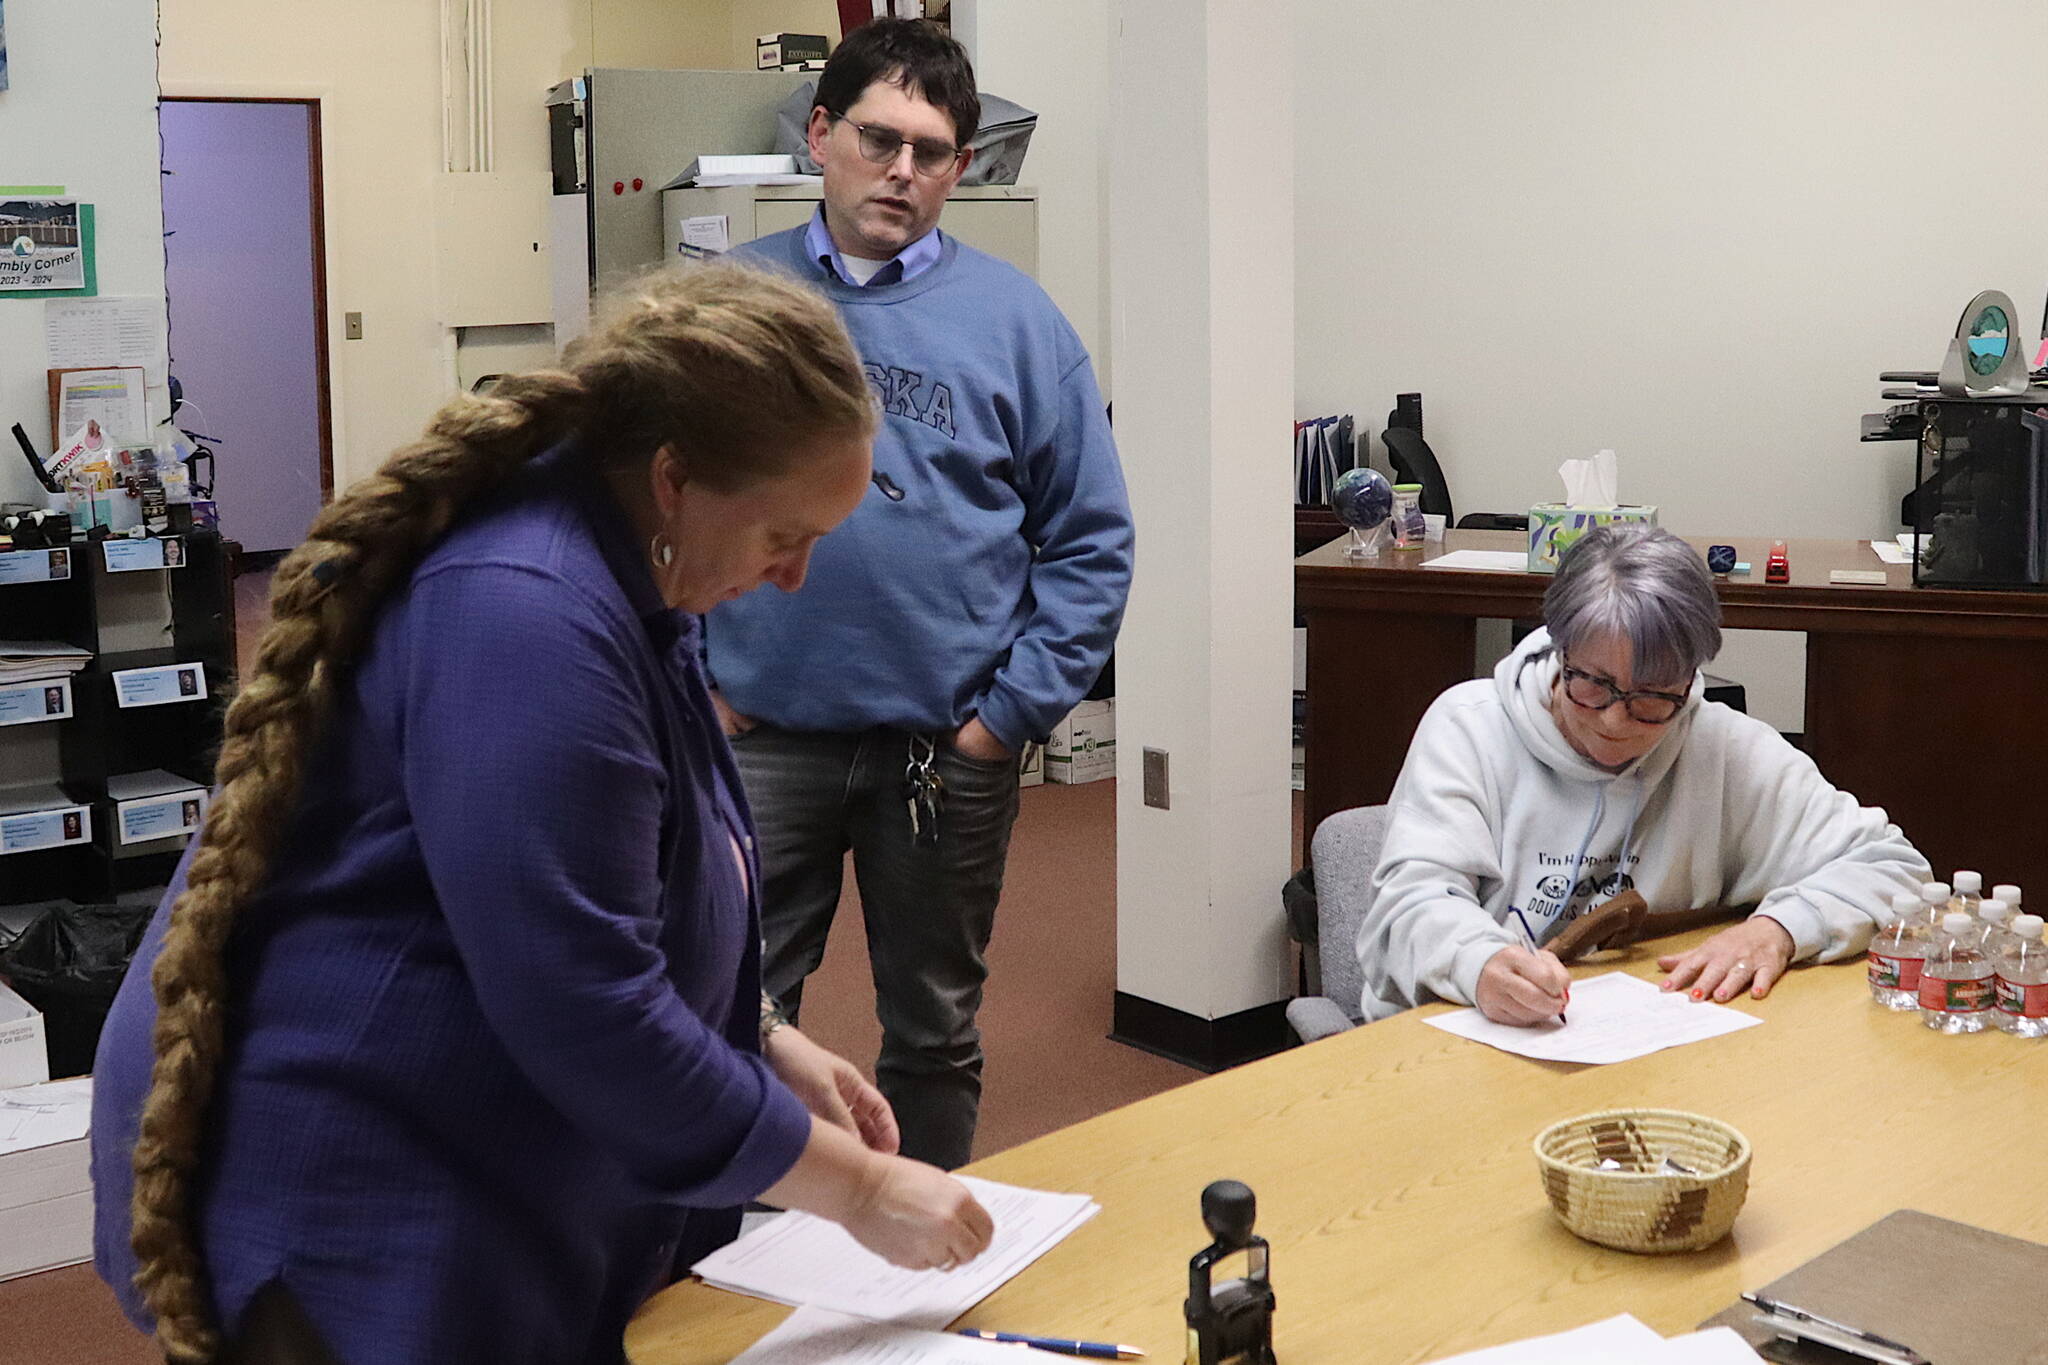 Michele Stuart Morgan (right), a Juneau Board of Education candidate, signs a qualifying petition for Jeff Redmond (center), who is also seeking one of three school board seats in the Oct. 1 municipal election, just before Monday’s filing deadline at City Hall. At left, Deputy Municipal Clerk Diane Cathcart processes last-minute paperwork filed by candidates. (Mark Sabbatini / Juneau Empire)